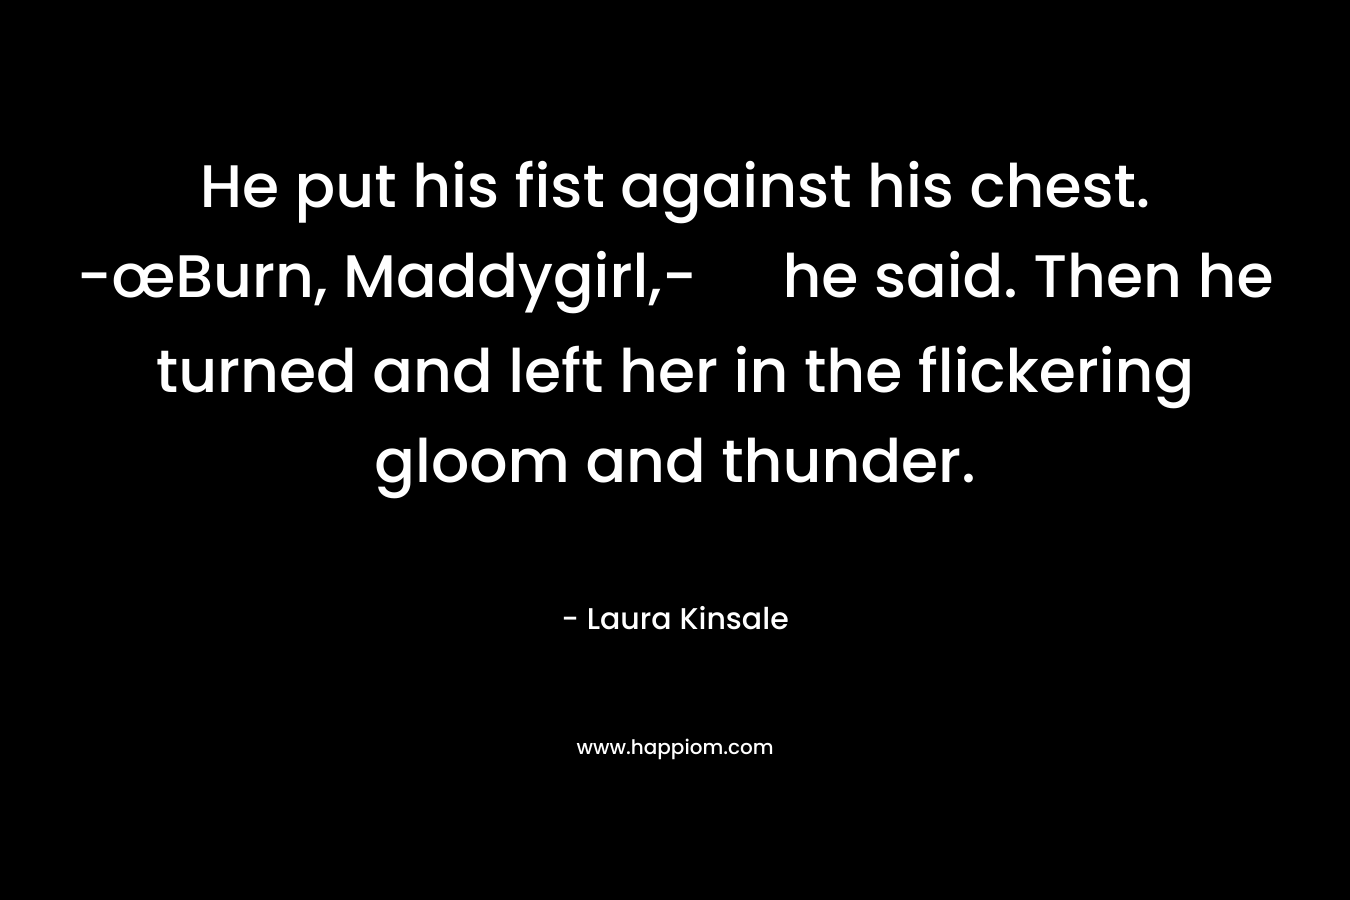 He put his fist against his chest. -œBurn, Maddygirl,- he said. Then he turned and left her in the flickering gloom and thunder.